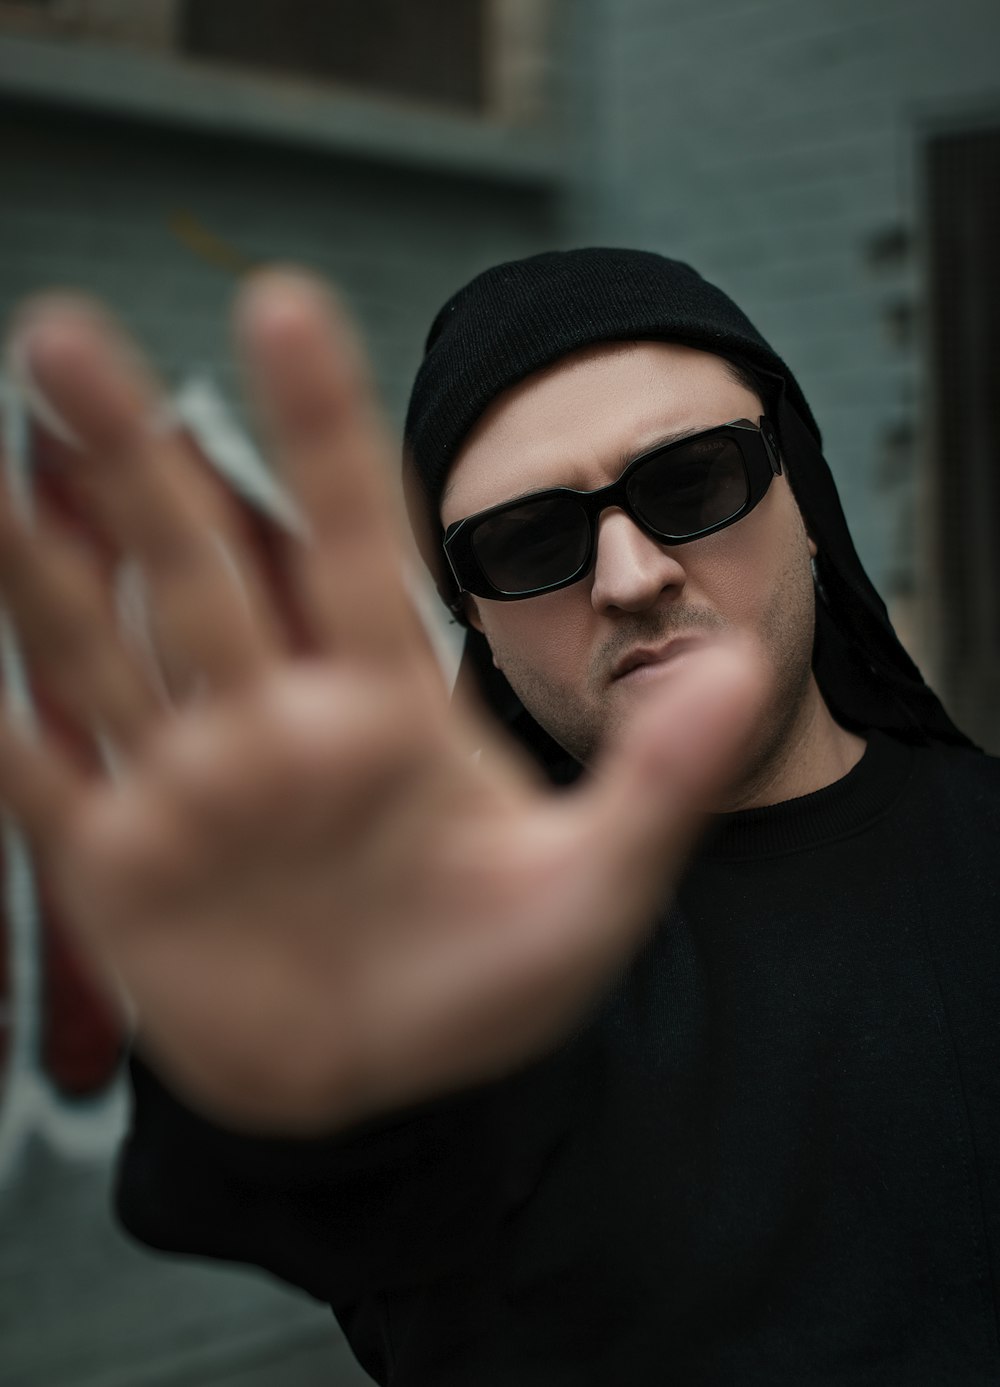 a man wearing sunglasses and a black hoodie making a hand gesture